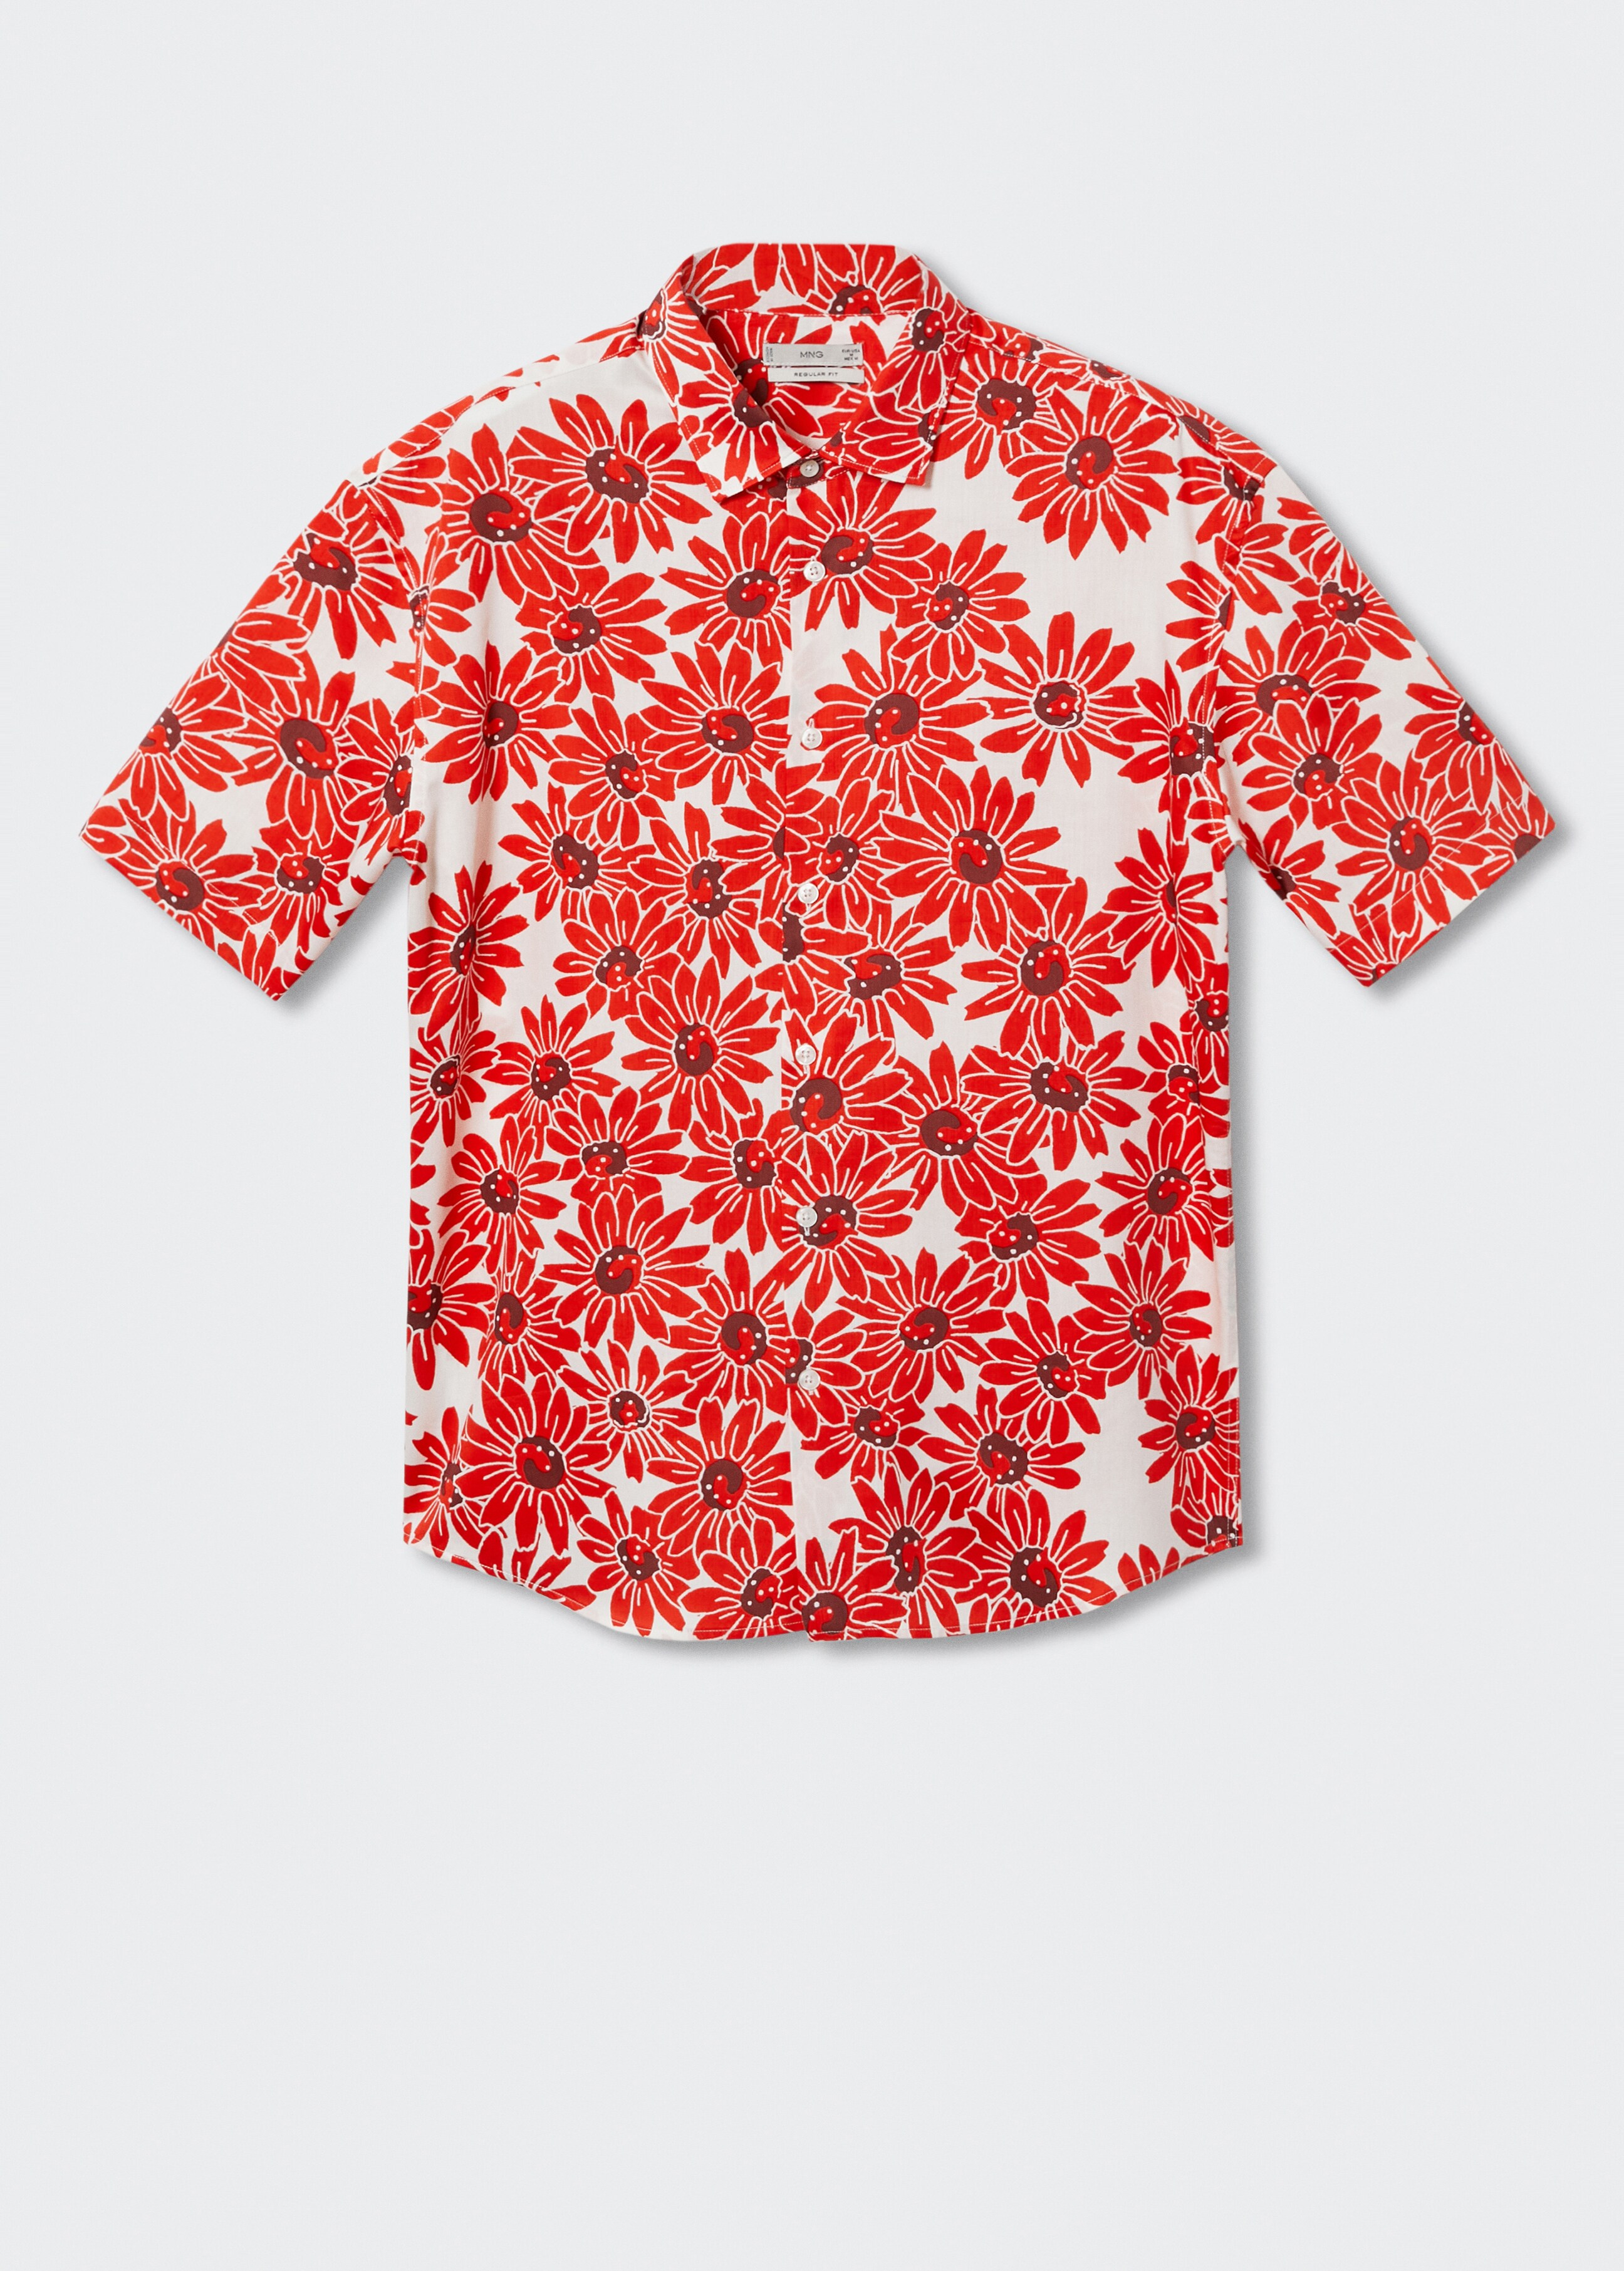 Floral print shirt - Article without model